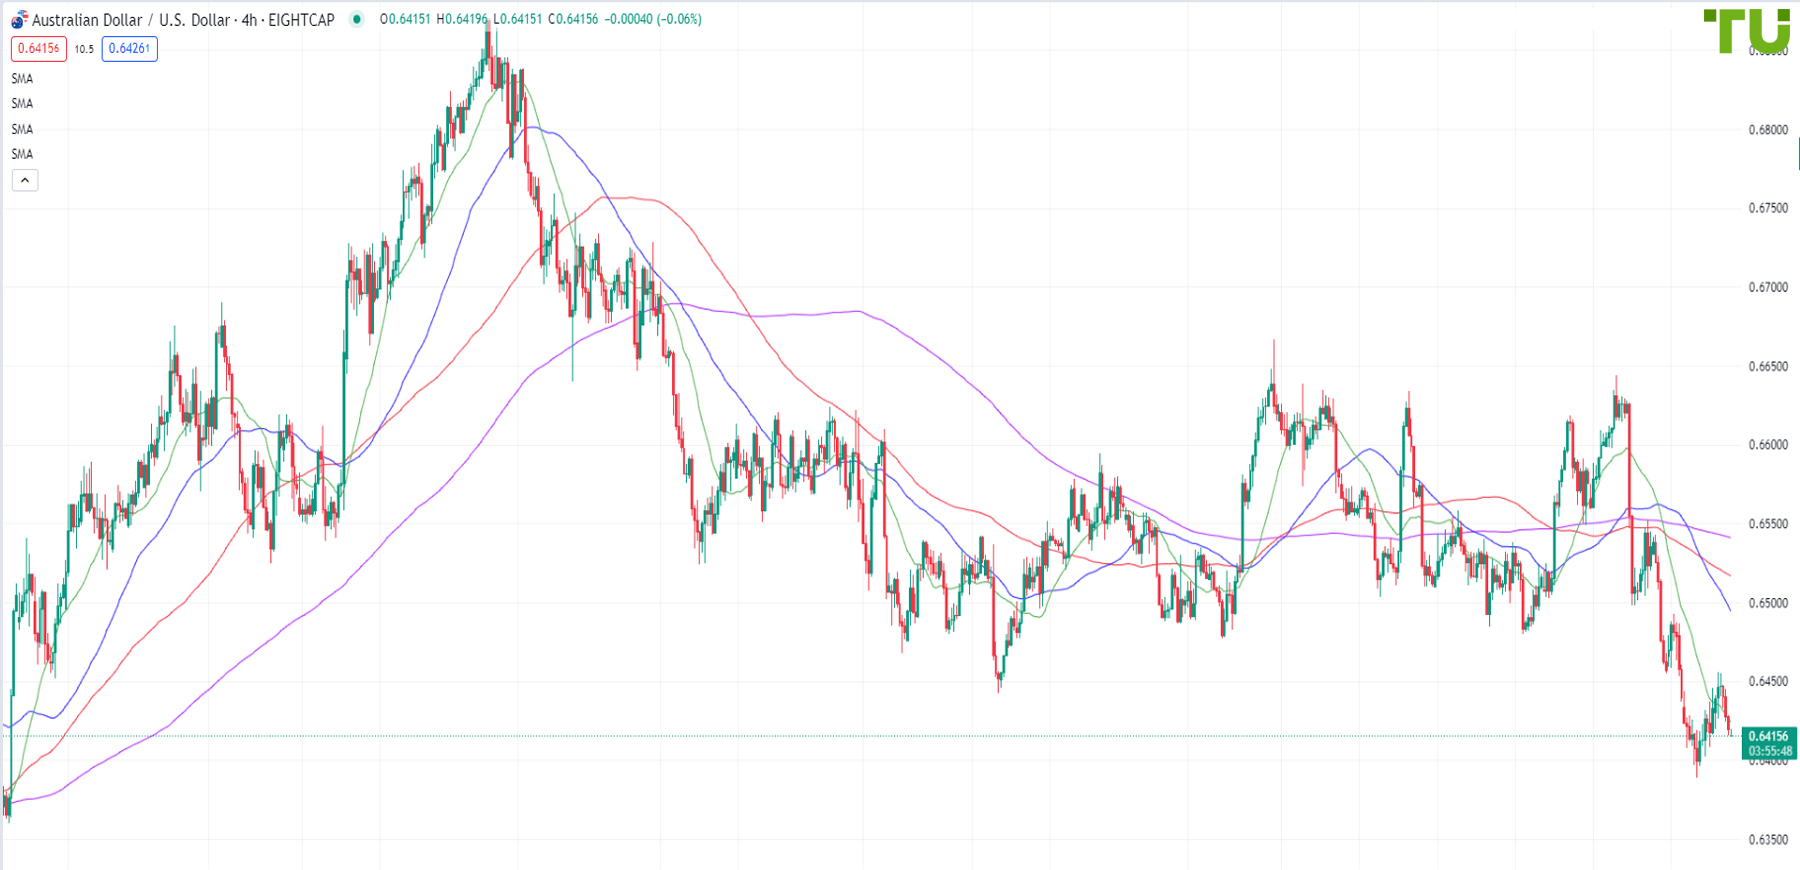 AUD/USD is declining after a pullback